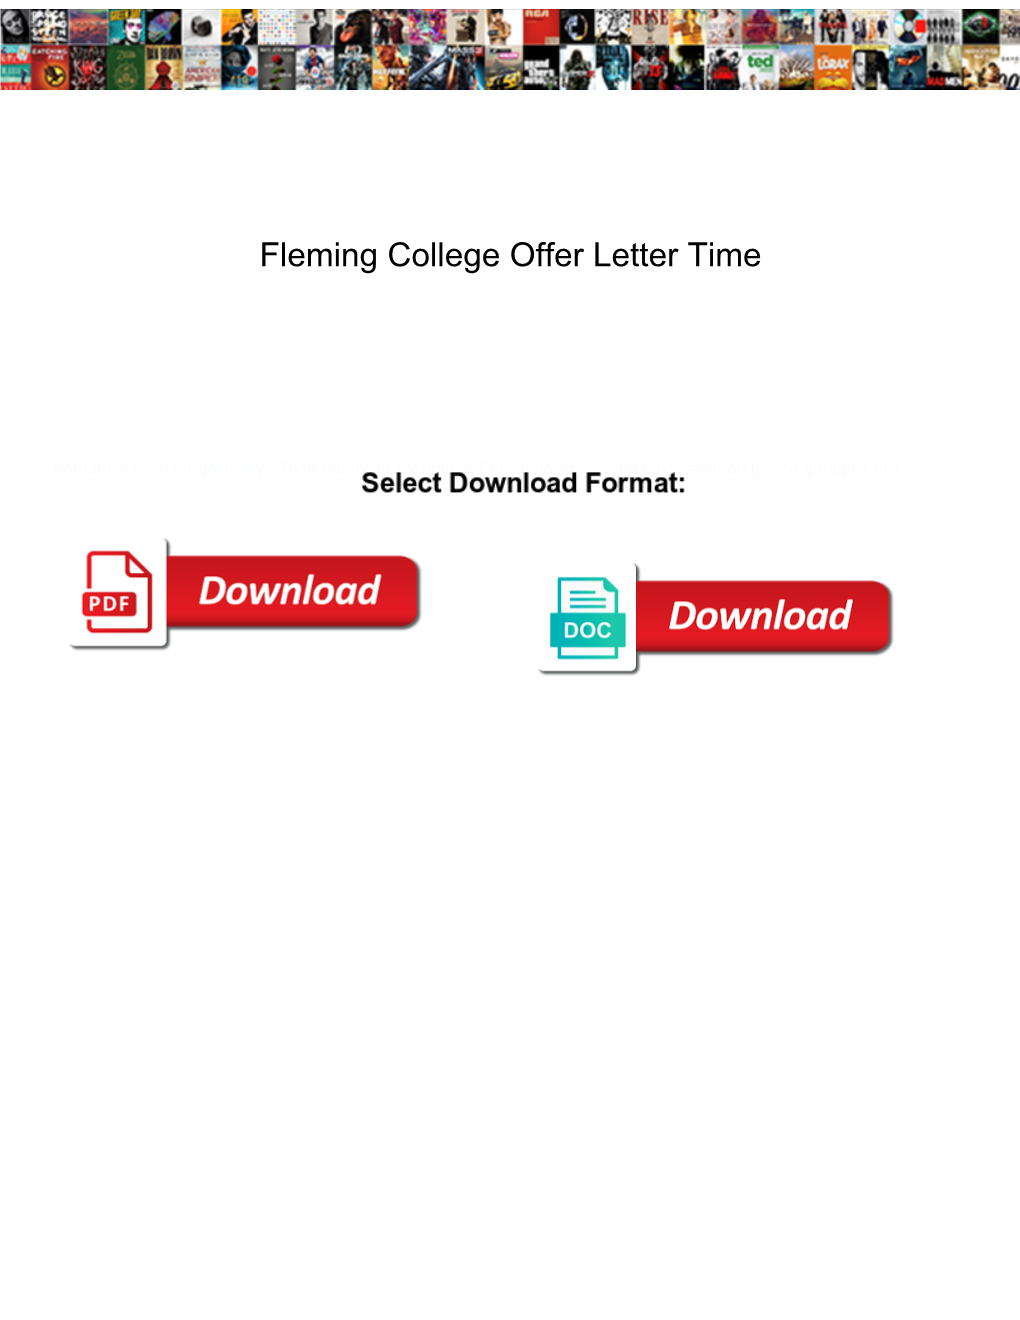 Fleming College Offer Letter Time